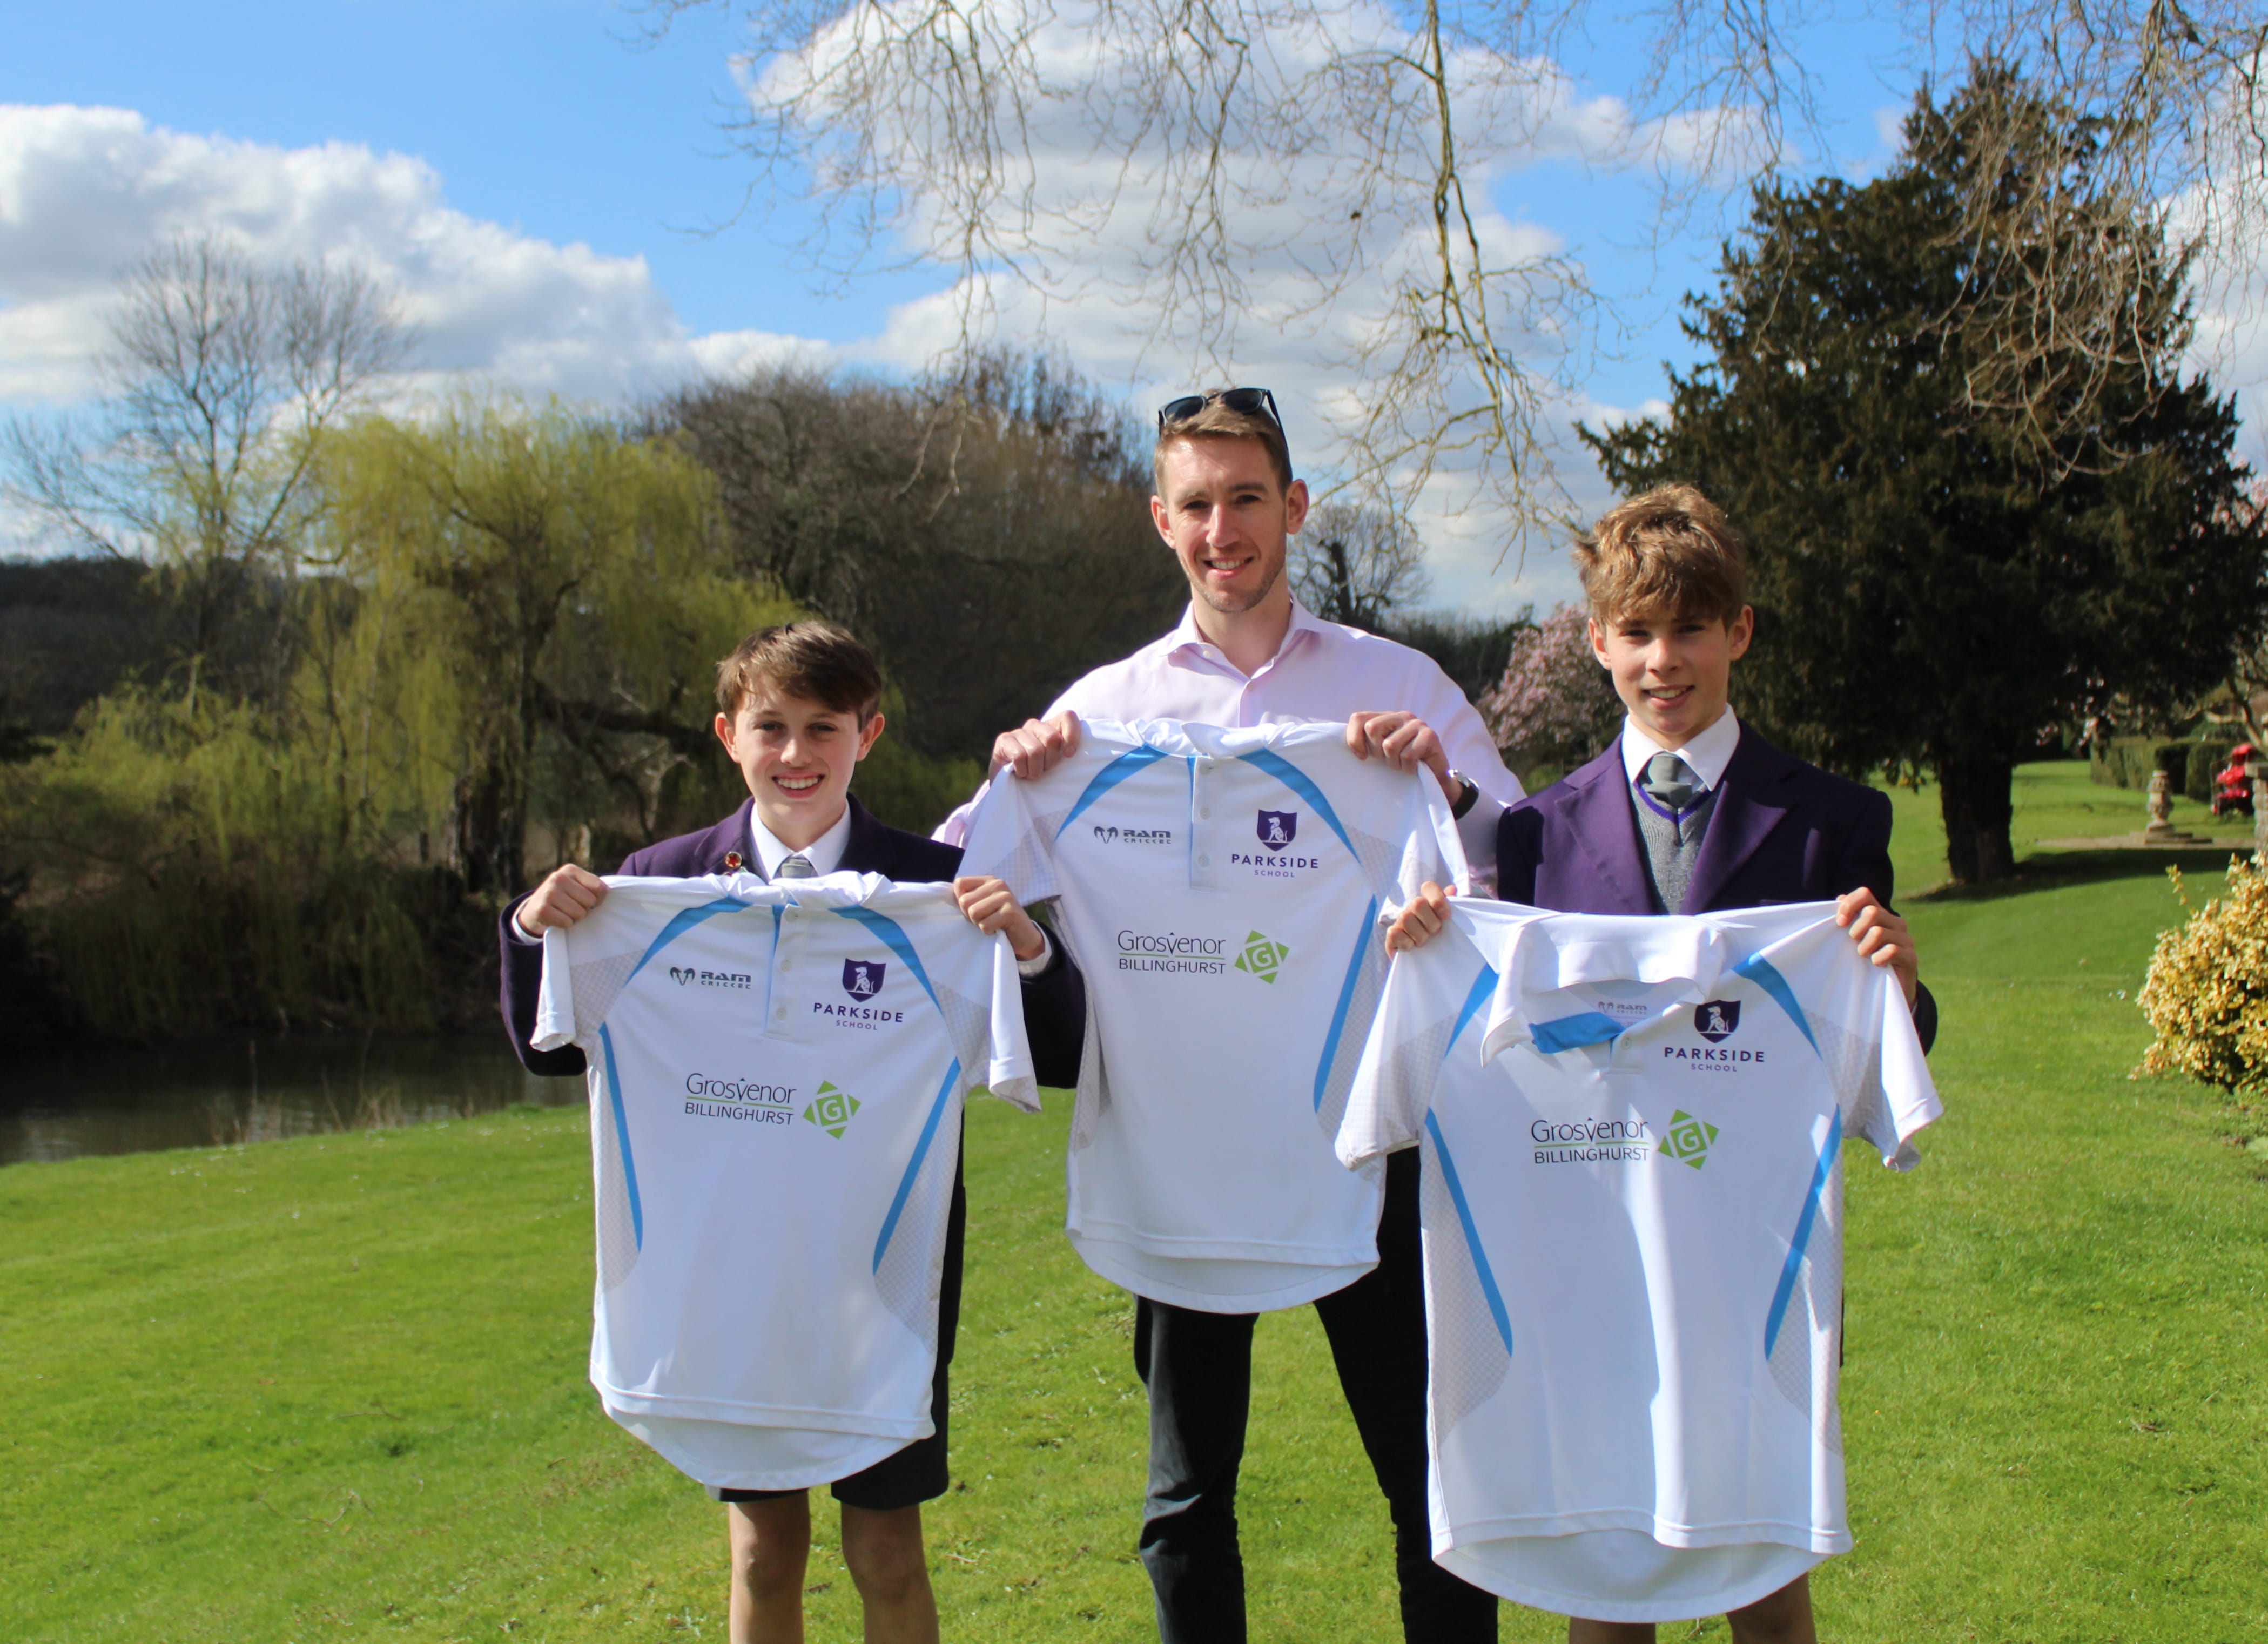 Grosvenor's Managing Director is joined by Jack P left 12 and Luke W right 13 to unveil the new team kit for St Lucia Header